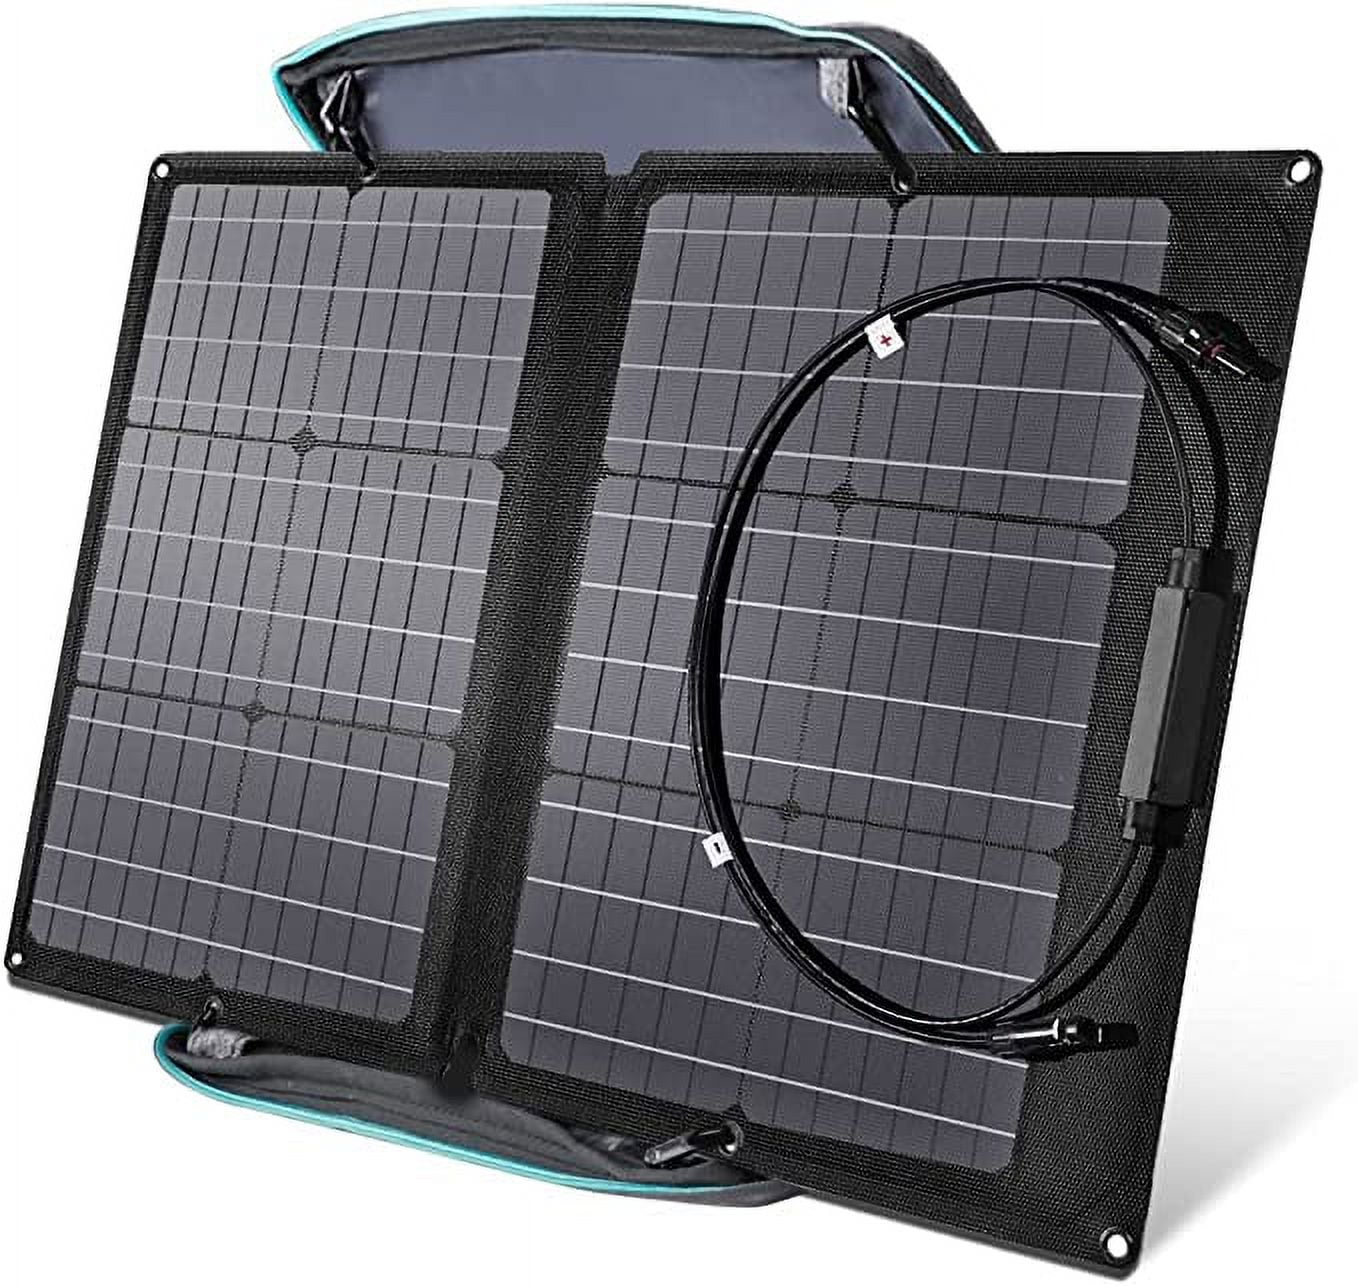 EcoFlow portable power stations and solar panels up to $350 off